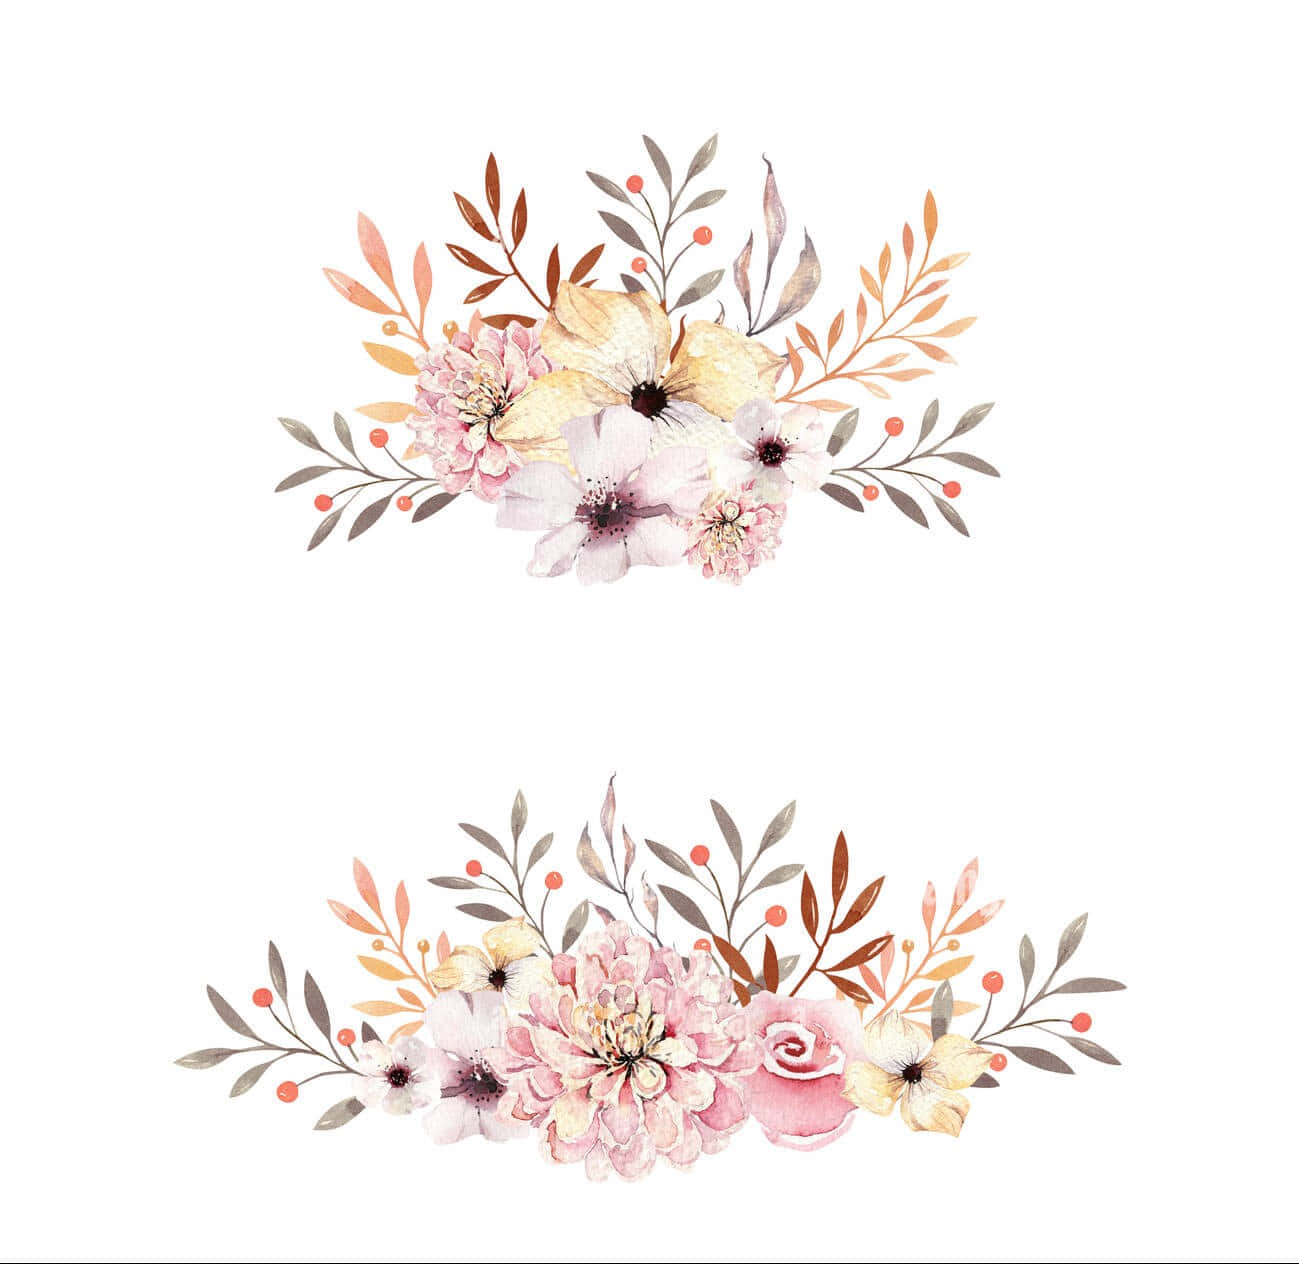 Beautiful Floral Tumblr Background